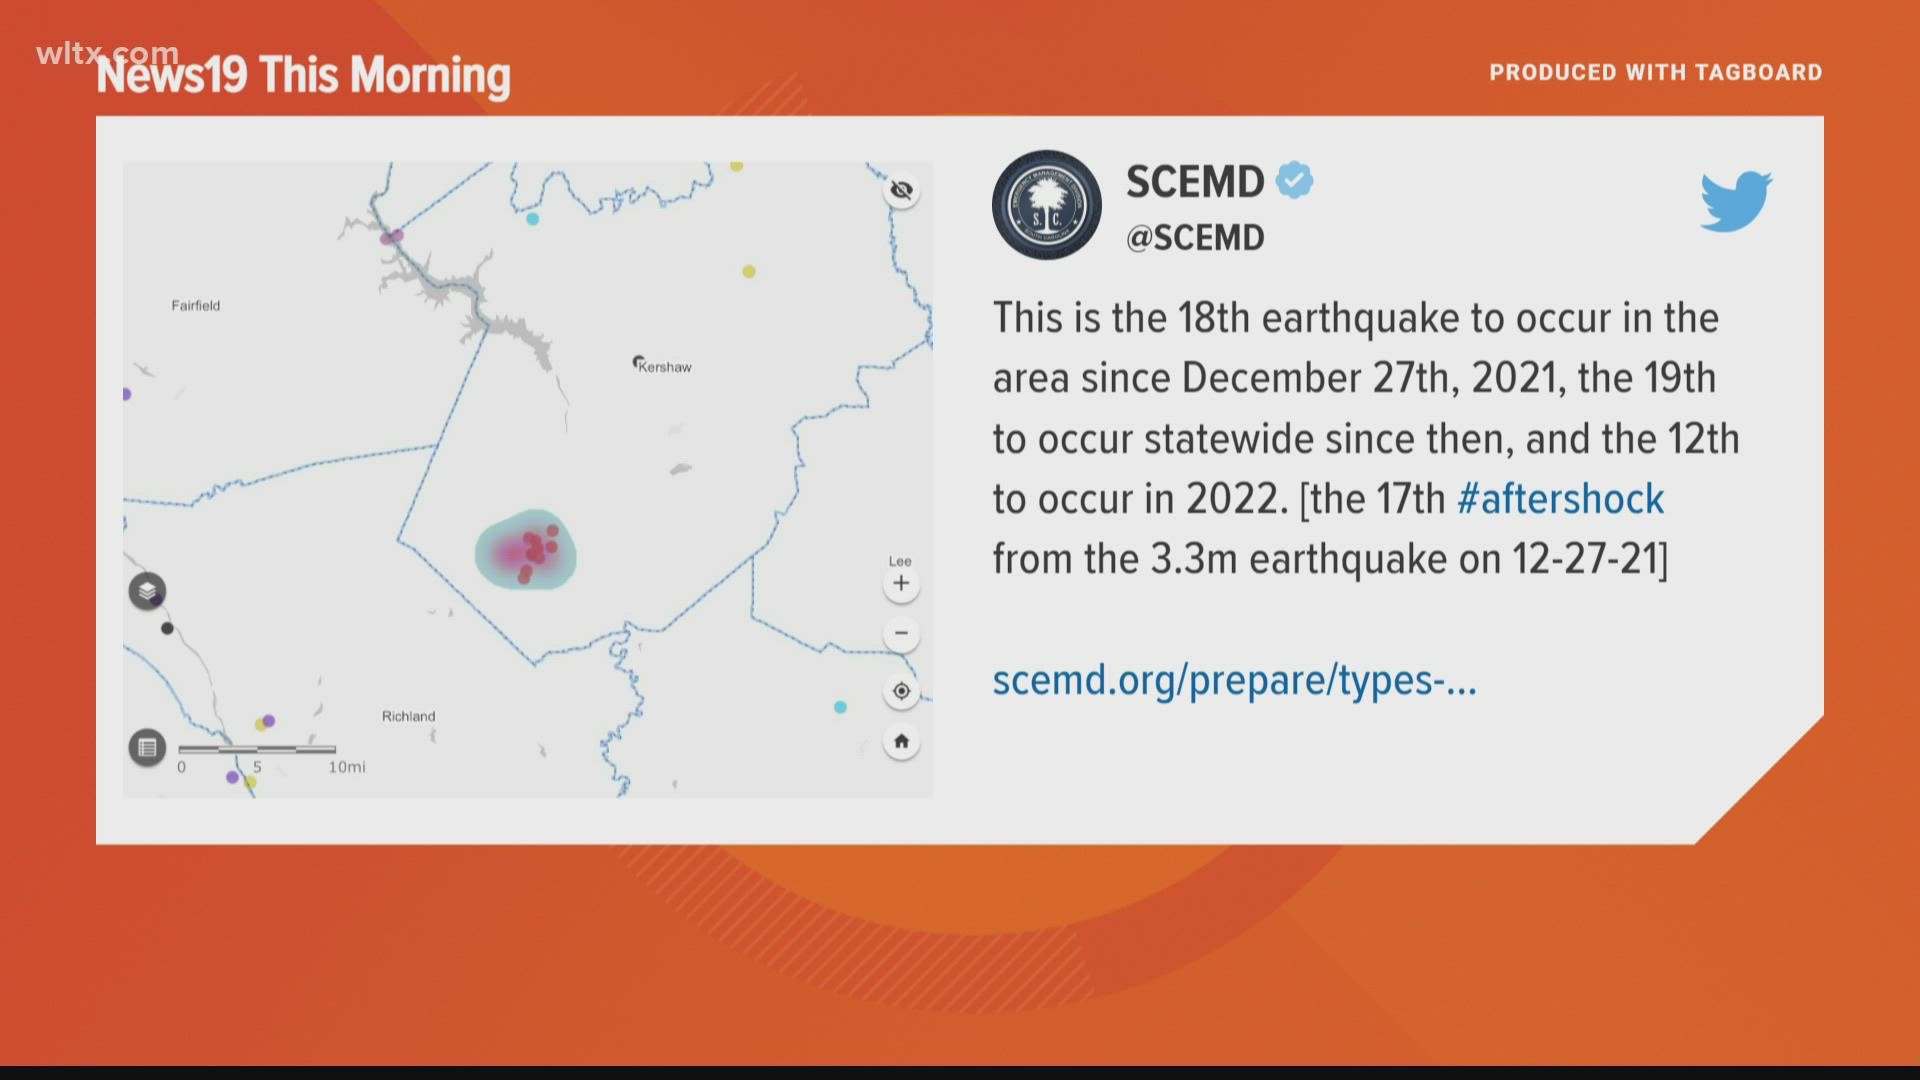 This is the 18th earthquake to occur in the area since Dec. 27, 2021, and the twelfth to occur in 2022, according to SCEMD.